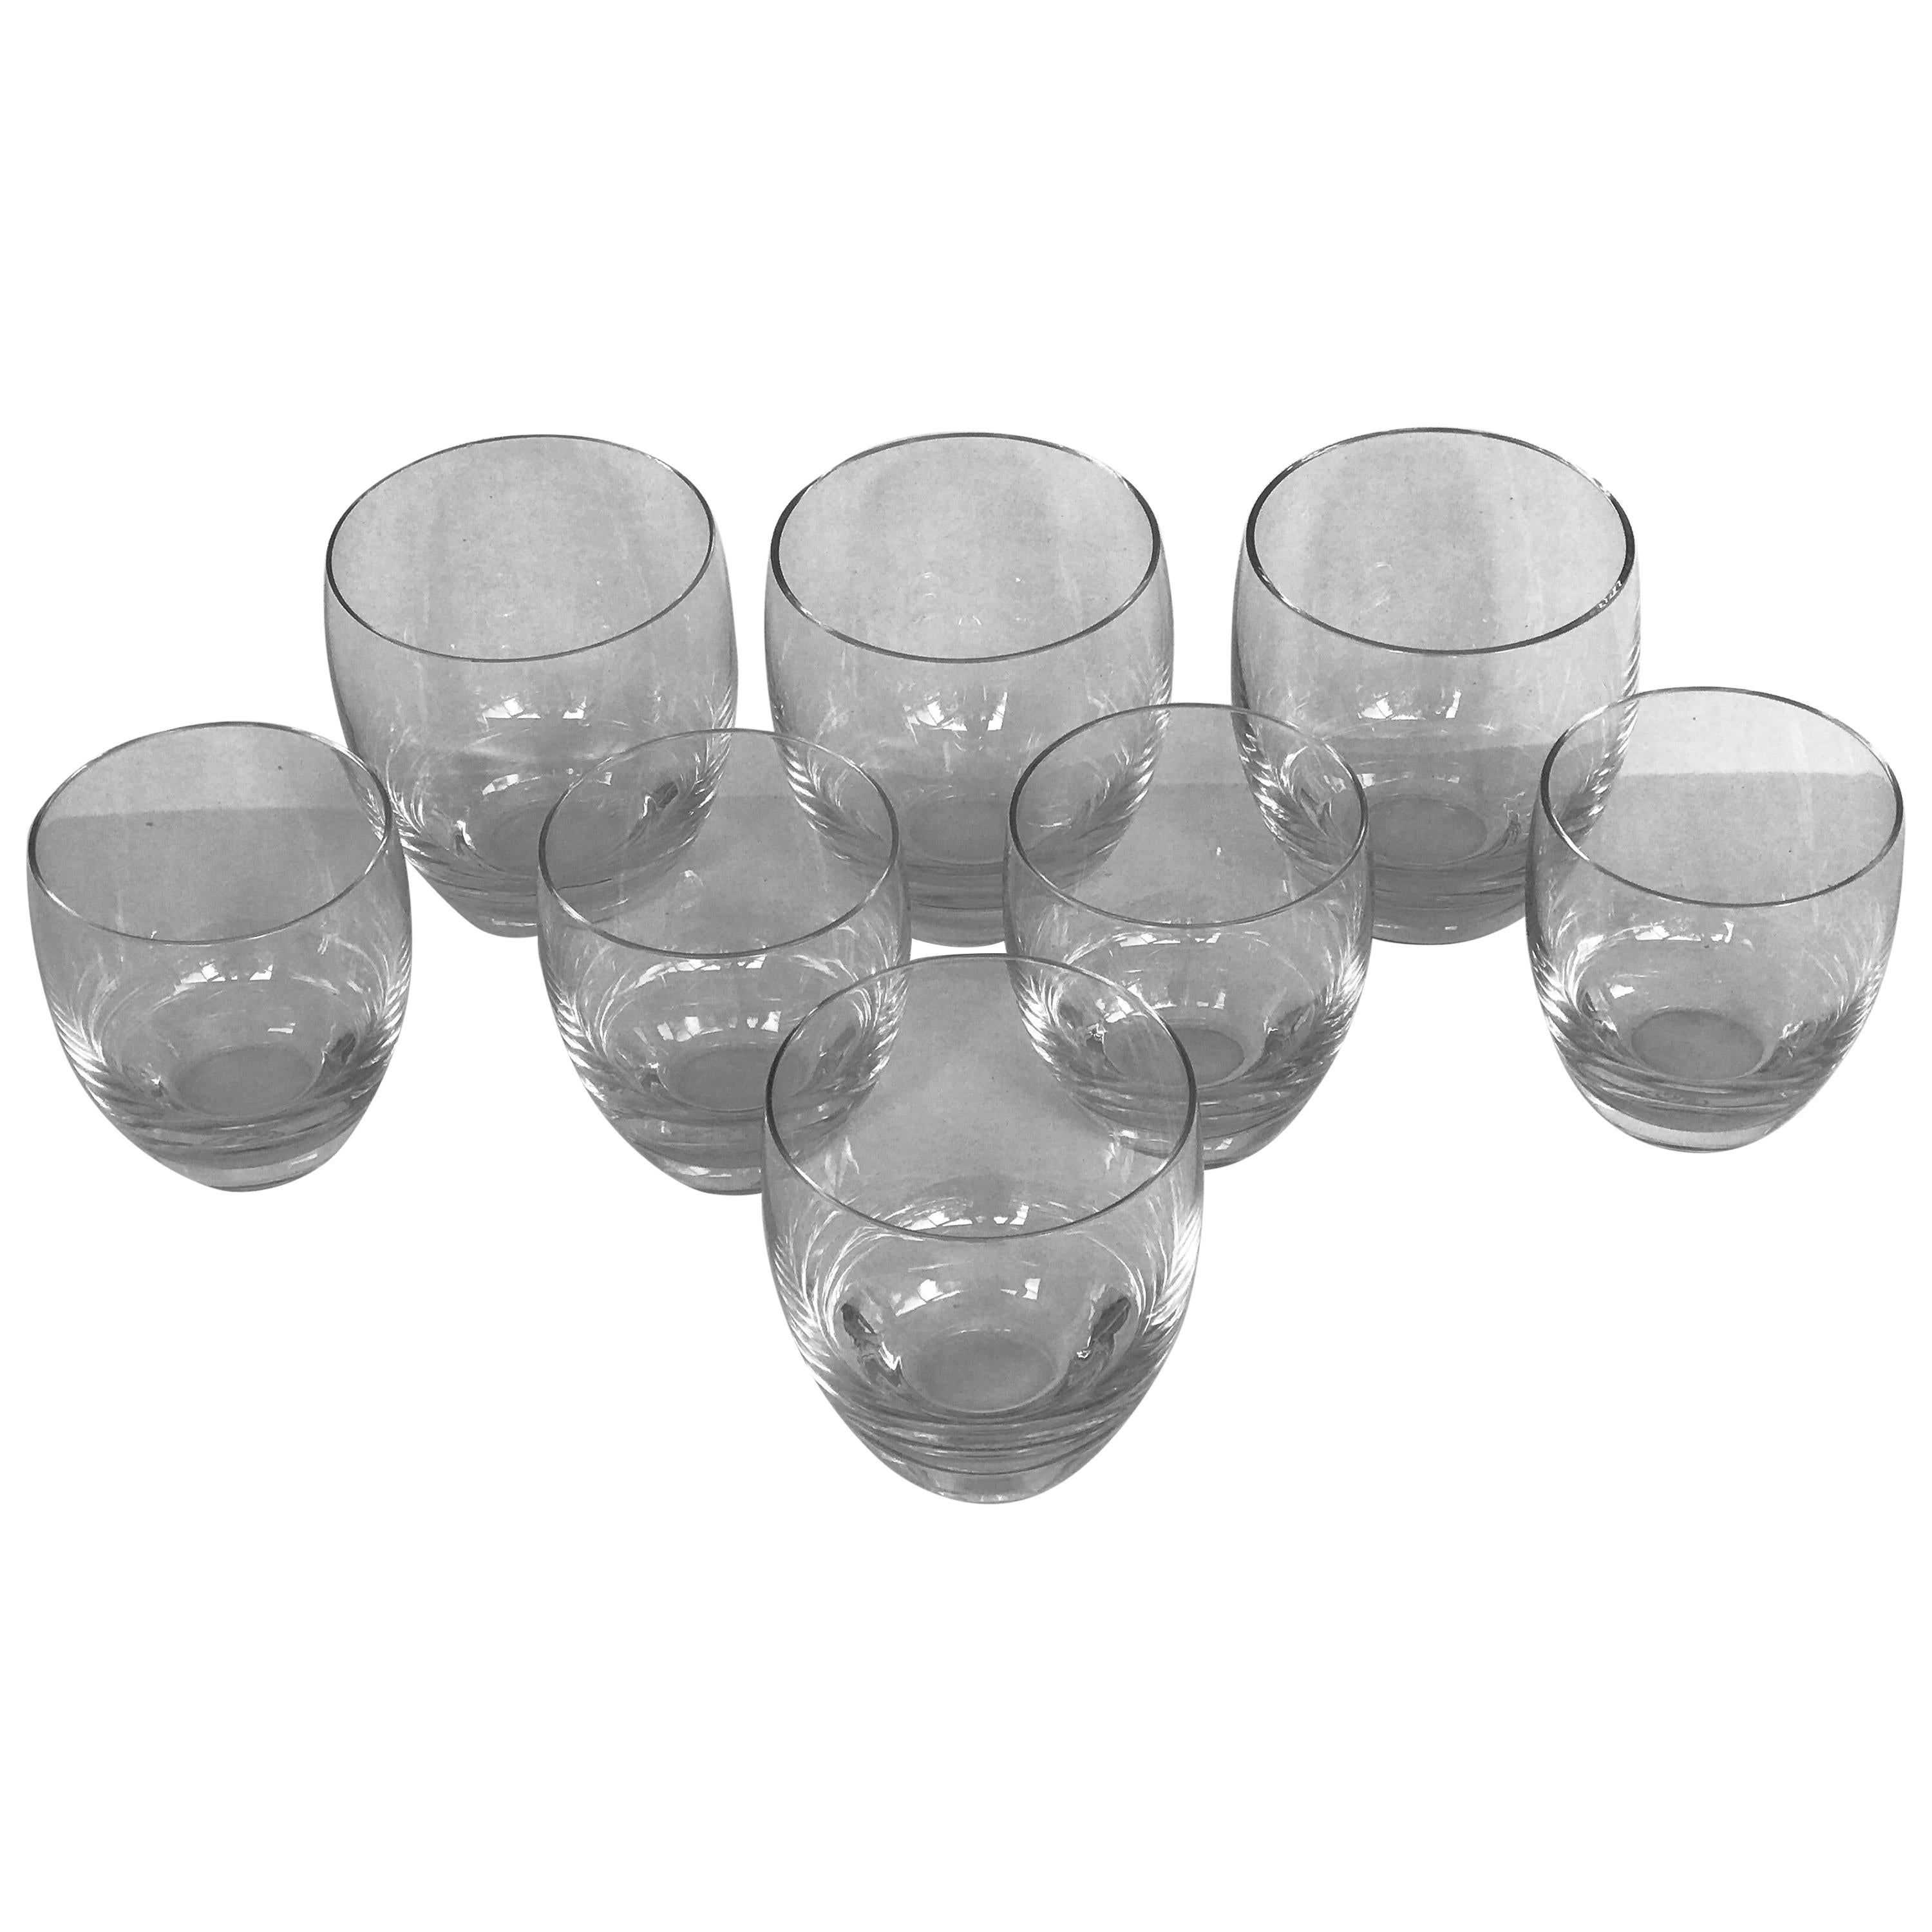 Baccarat Crystal Perfection Pattern Tumblers Grouping of 8, France, 1970s